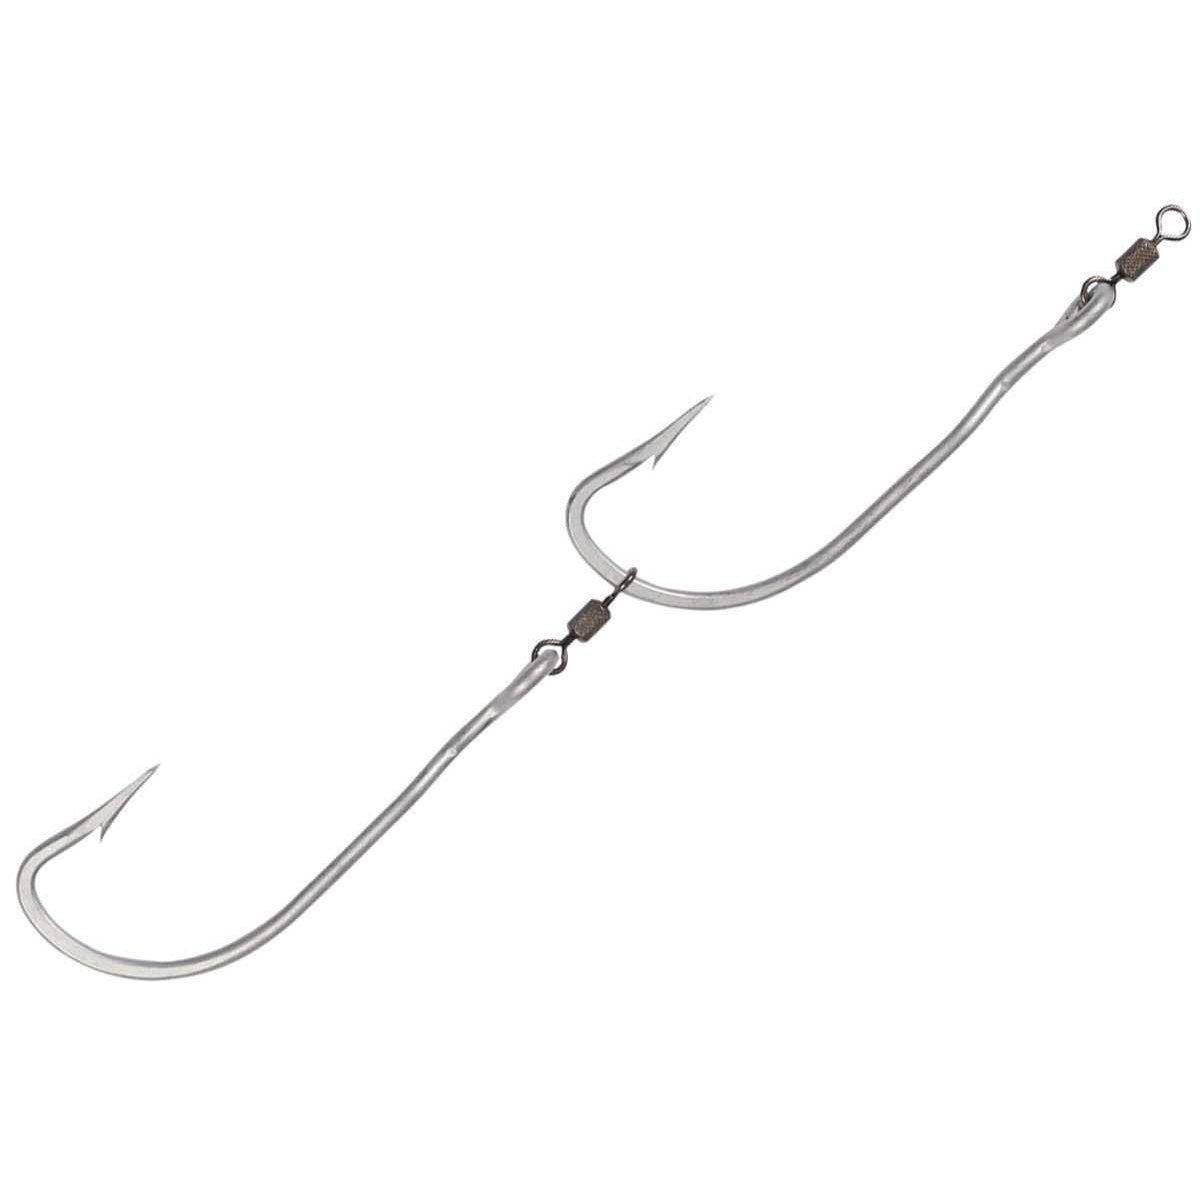 Rigging your own gang hooks for Tailor? - Fishing Chat - DECKEE